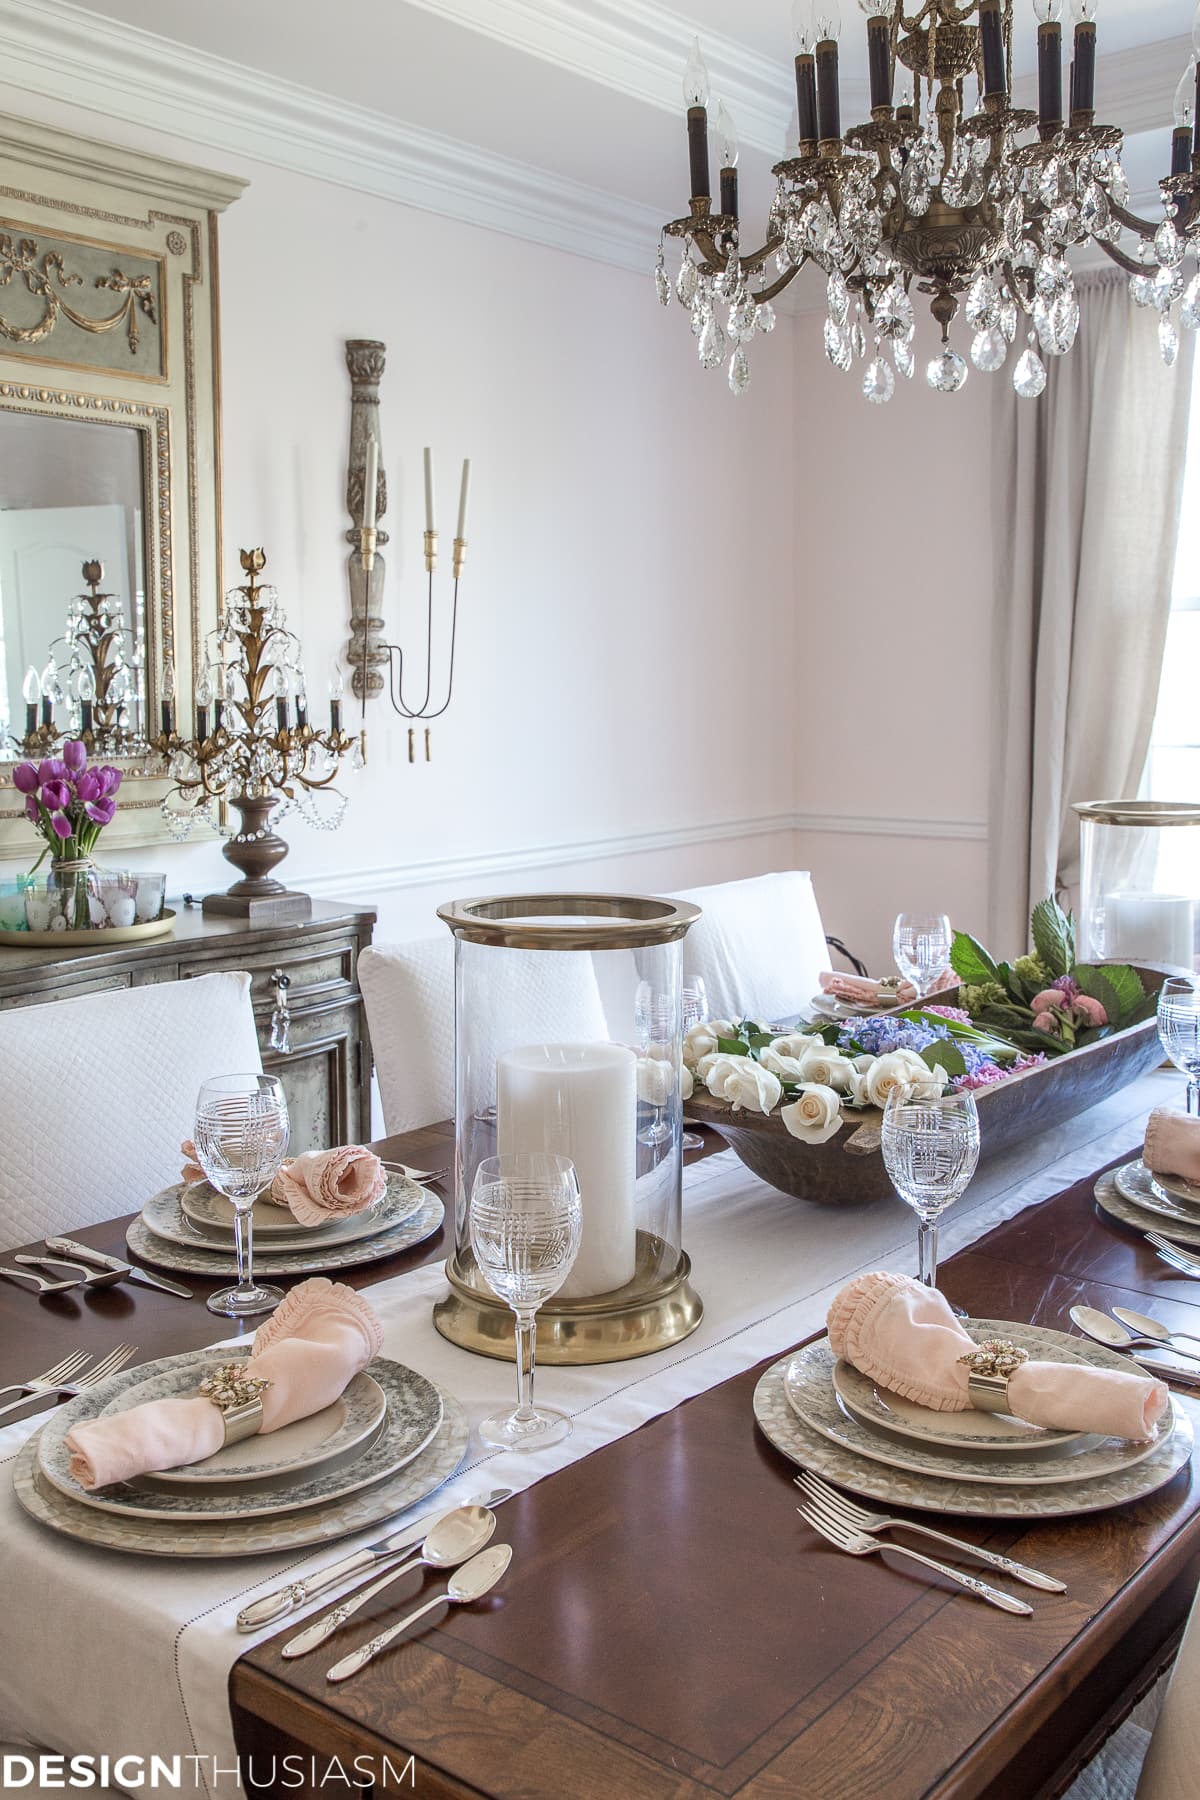 designthusiasm Simple Spring Decorating Ideas for the Dining Room